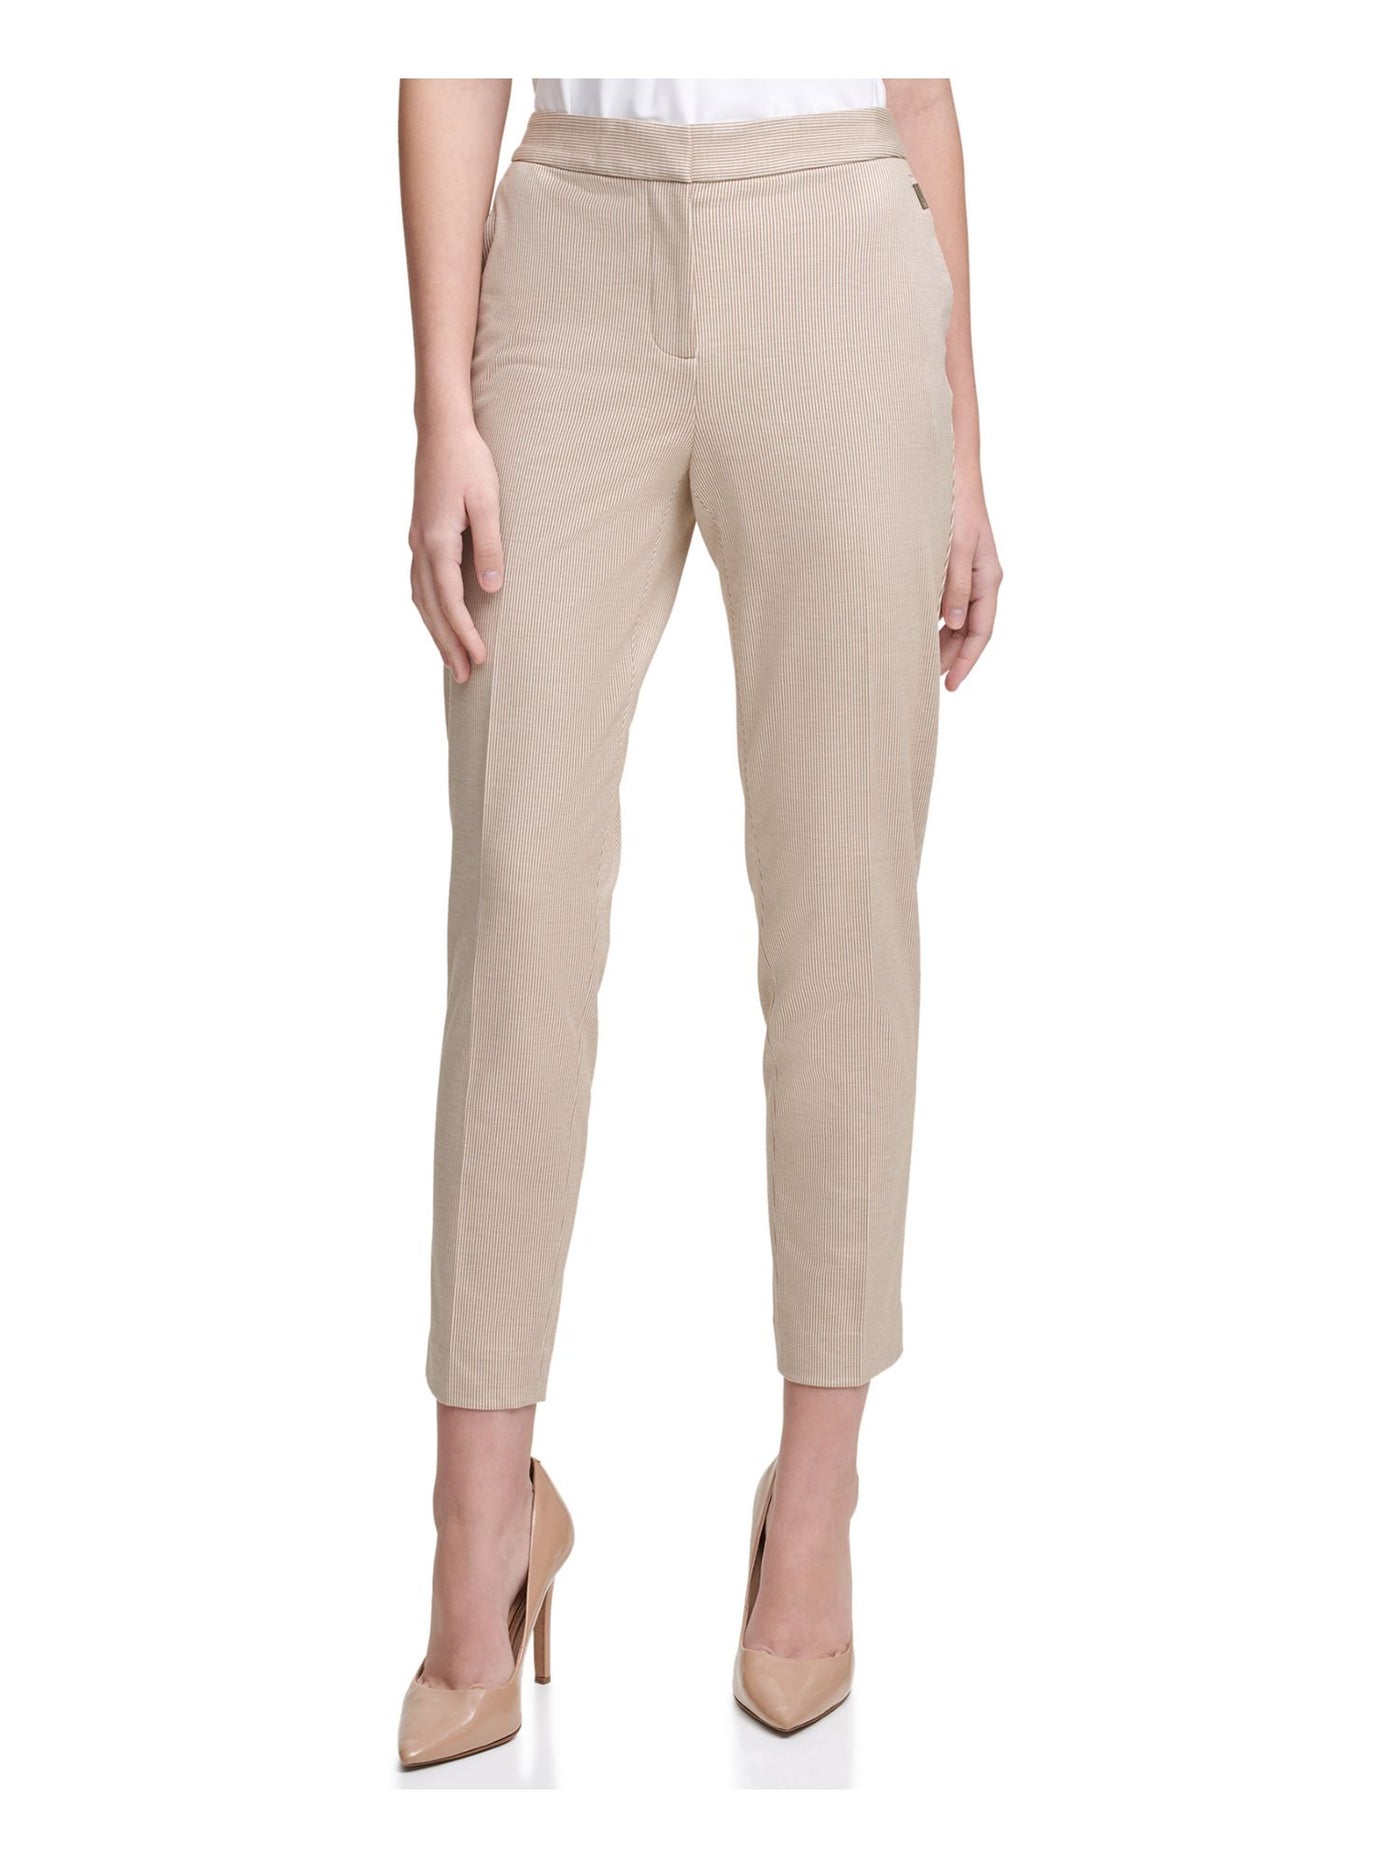 TOMMY HILFIGER Womens Zippered Pocketed Cropped Skinny Pants